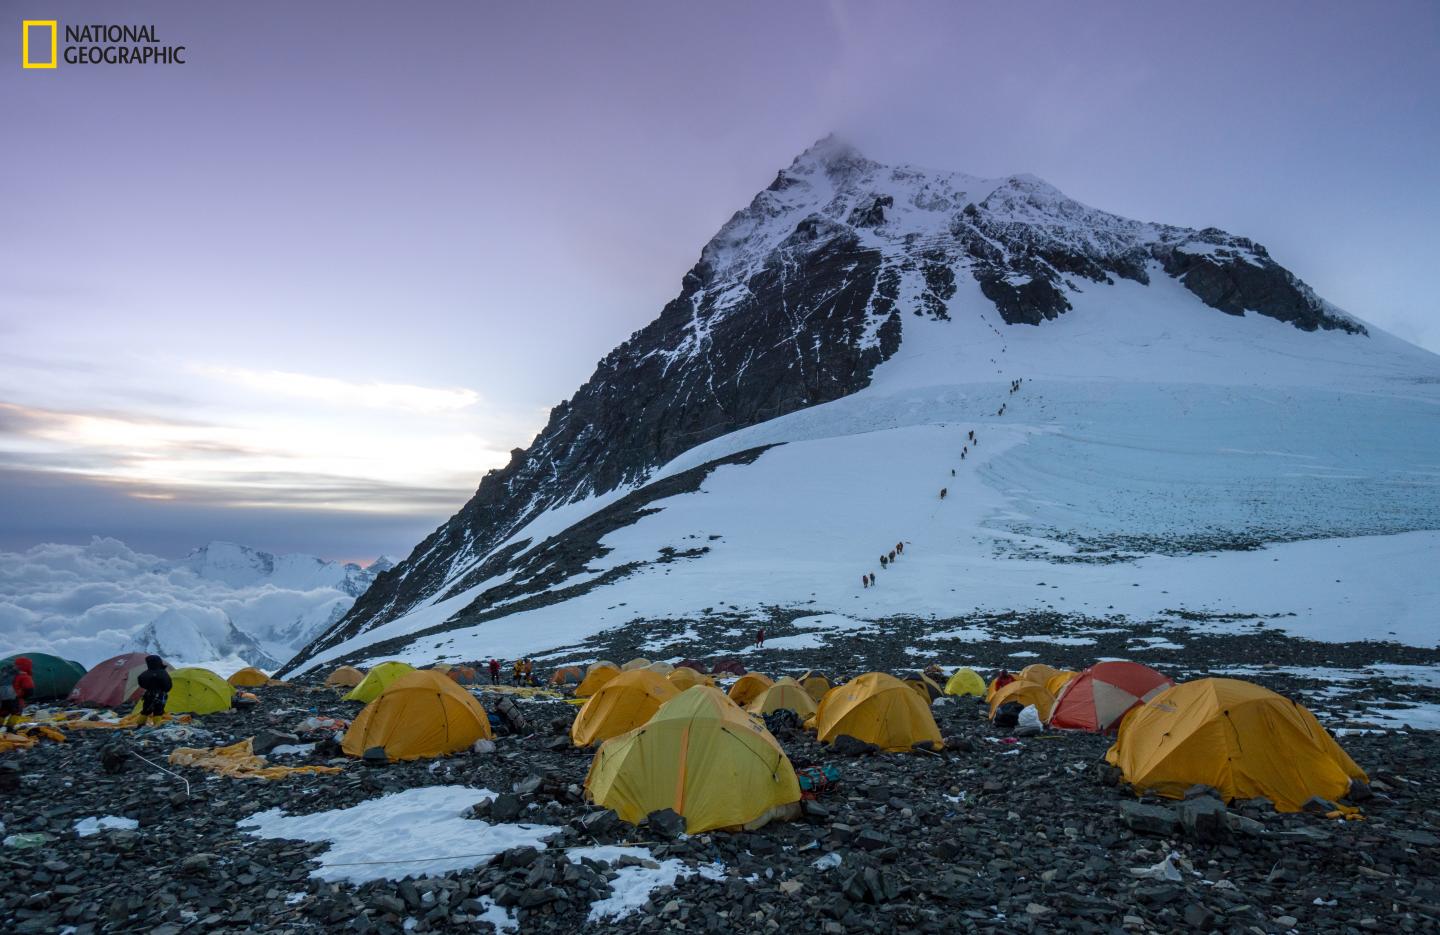 Tents and climbers